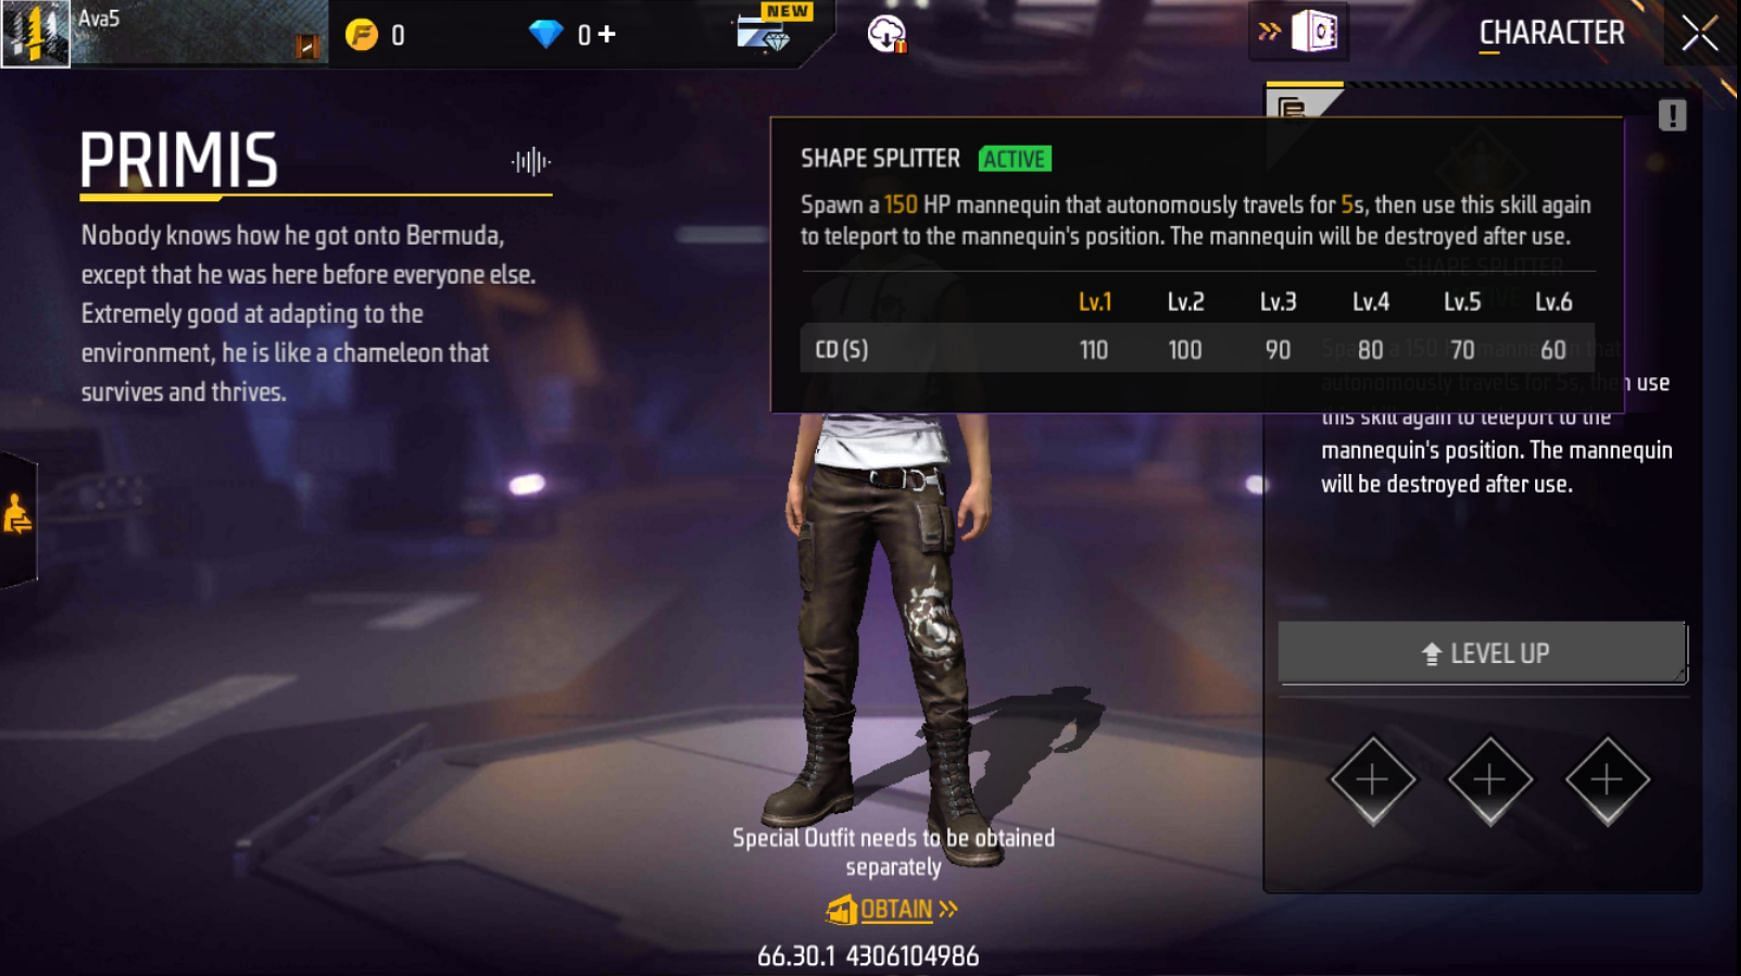 Free Fire OB28 All New Updates, New Double Controls,Pet, Character, Car,  Emotes, Guns Advance Server, Real-Time  Video View Count